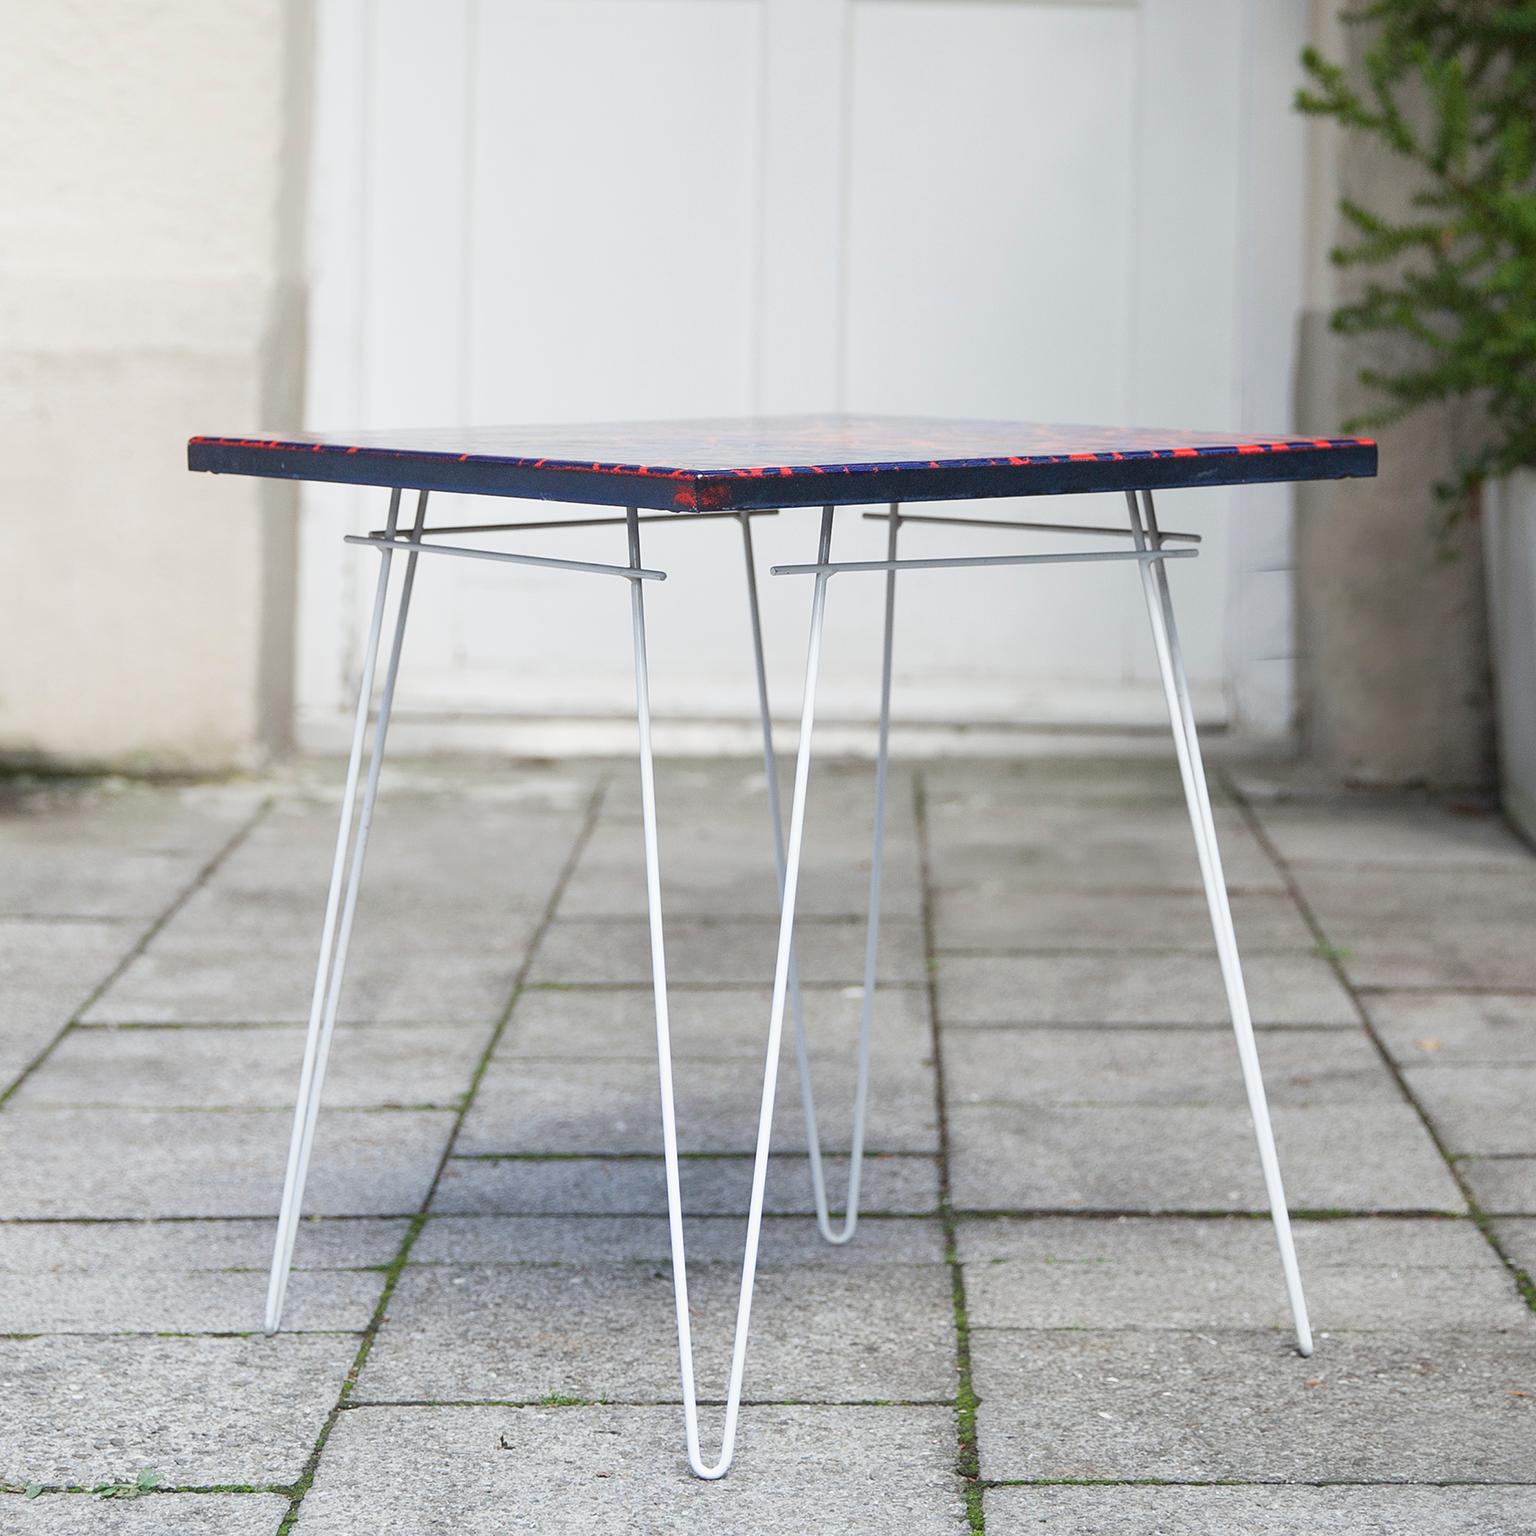 Enamel top side table in fantastic red blue color on an original white lacquered metal base from Germany 1960s.

 